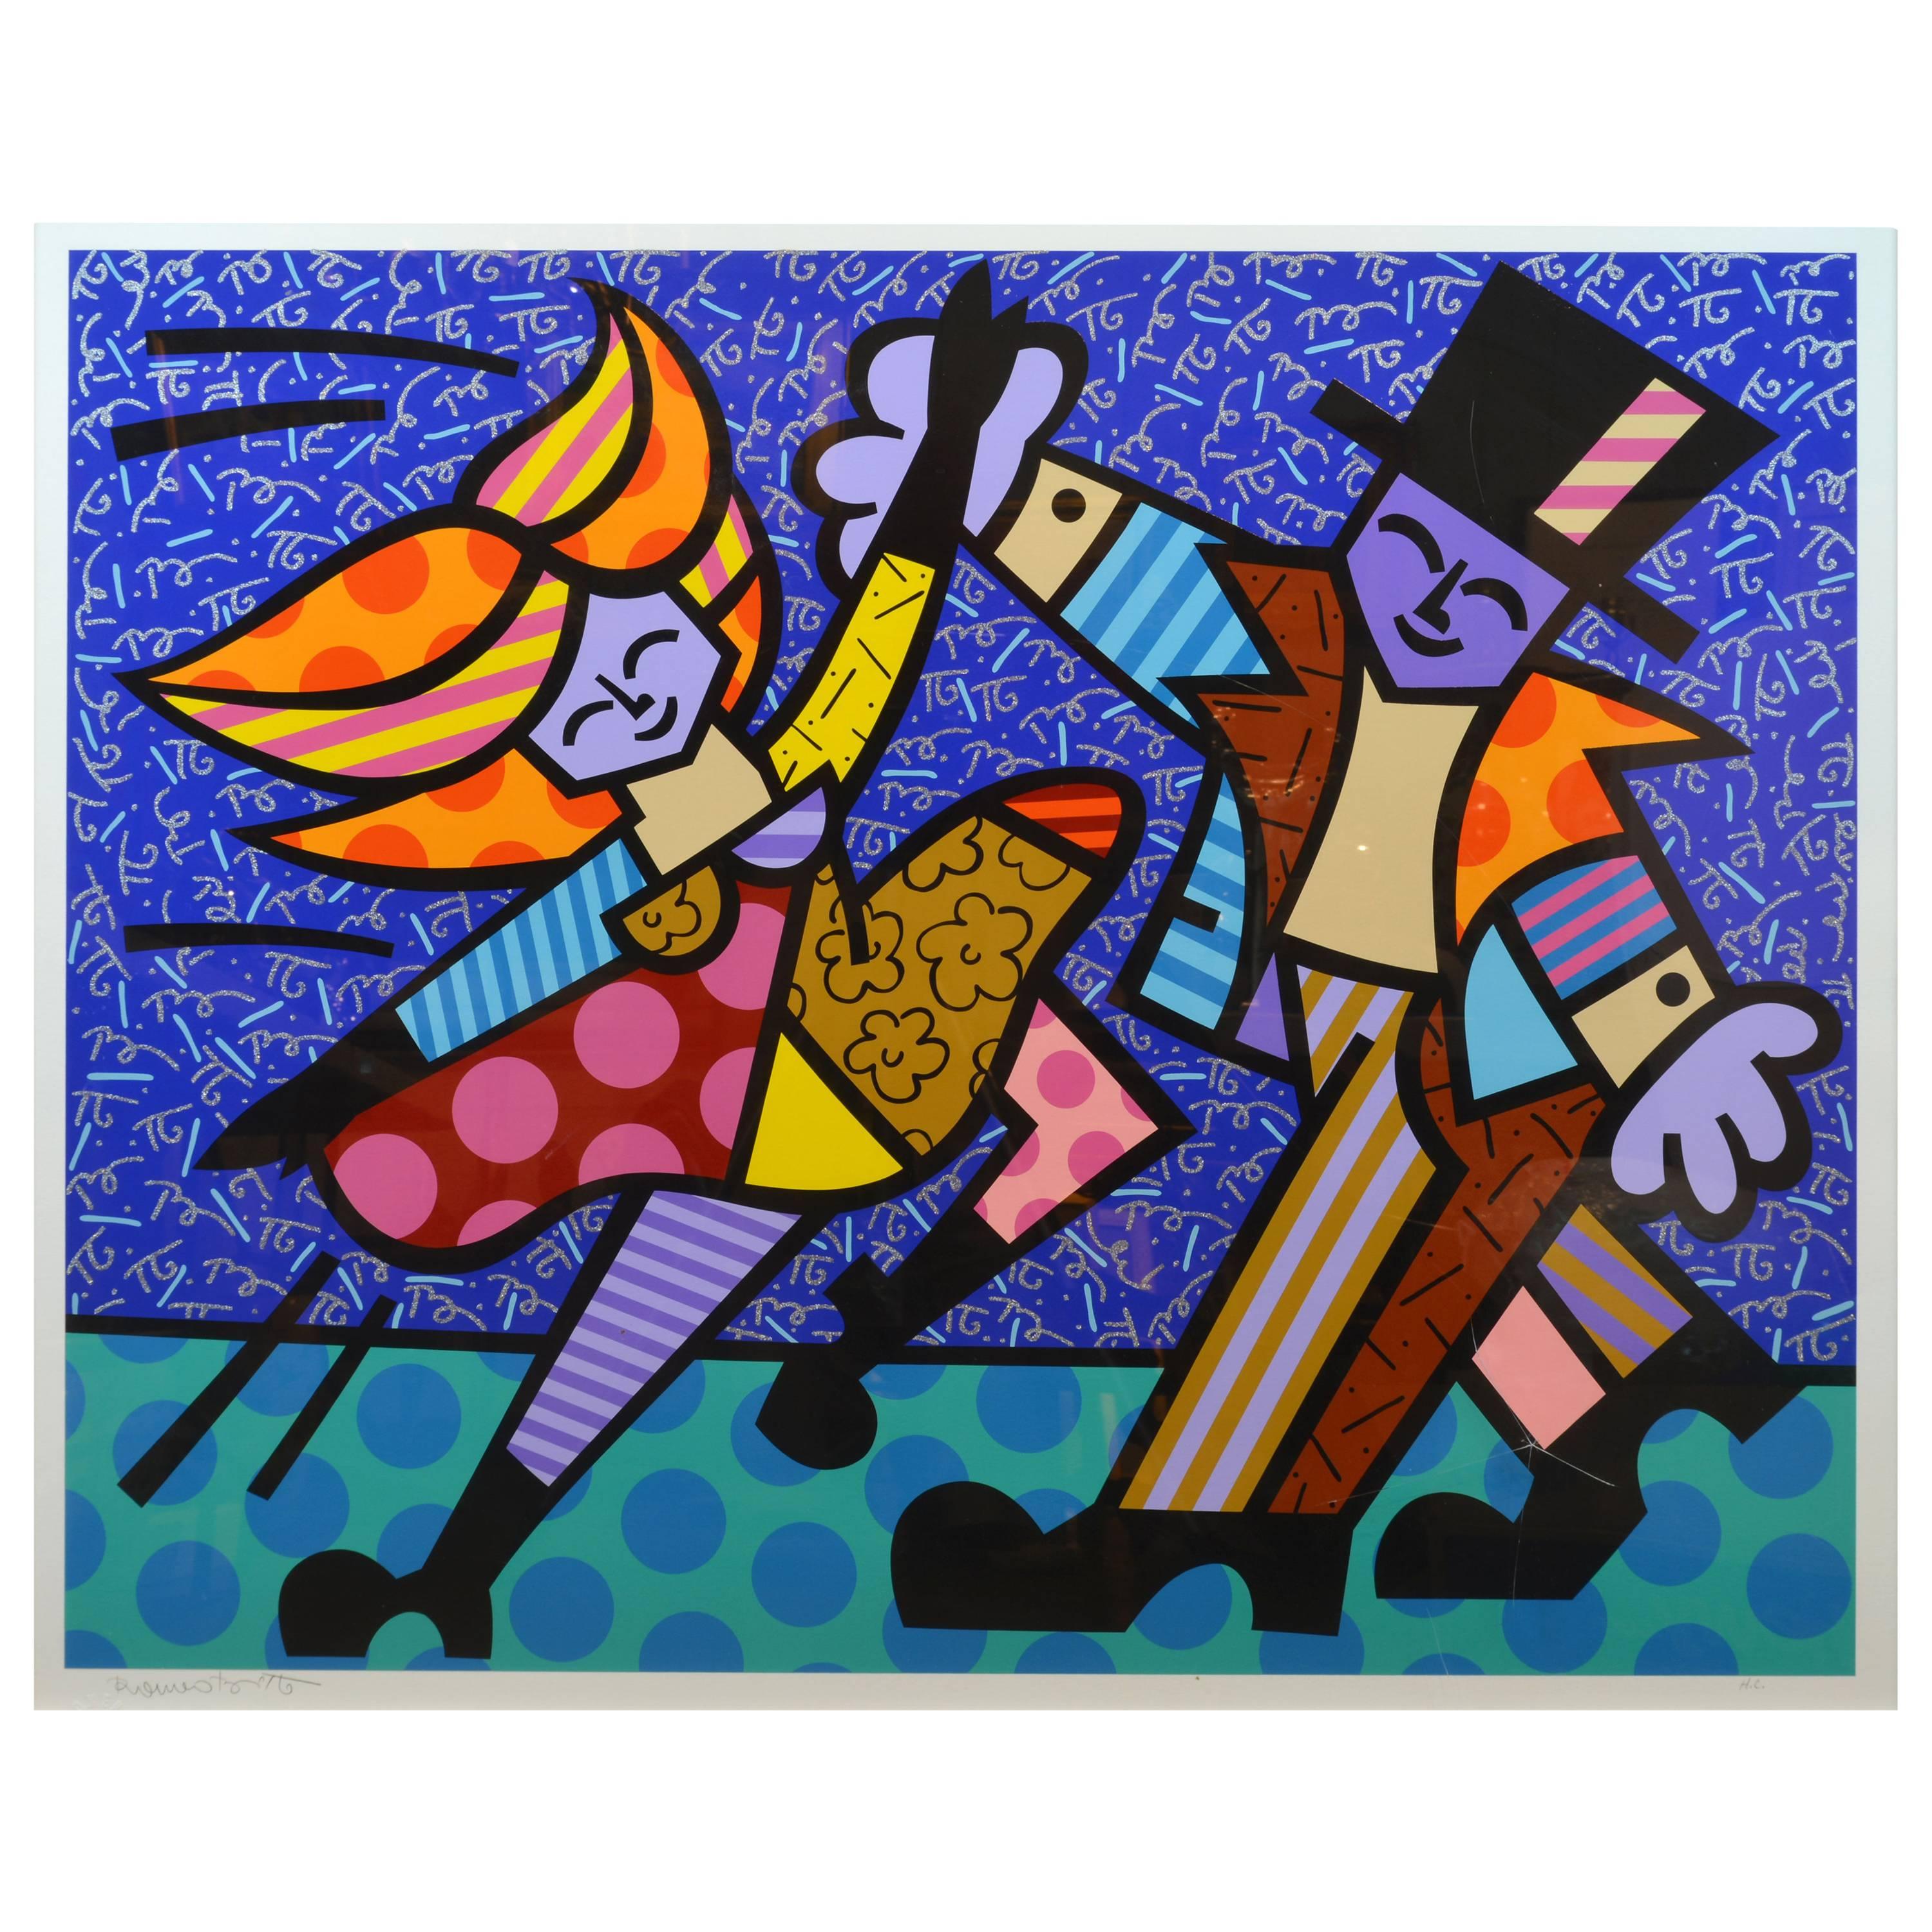 Large Romero Britto Serigraph 'Dancing Couple' Signed in Pencil, Annotated H.C.